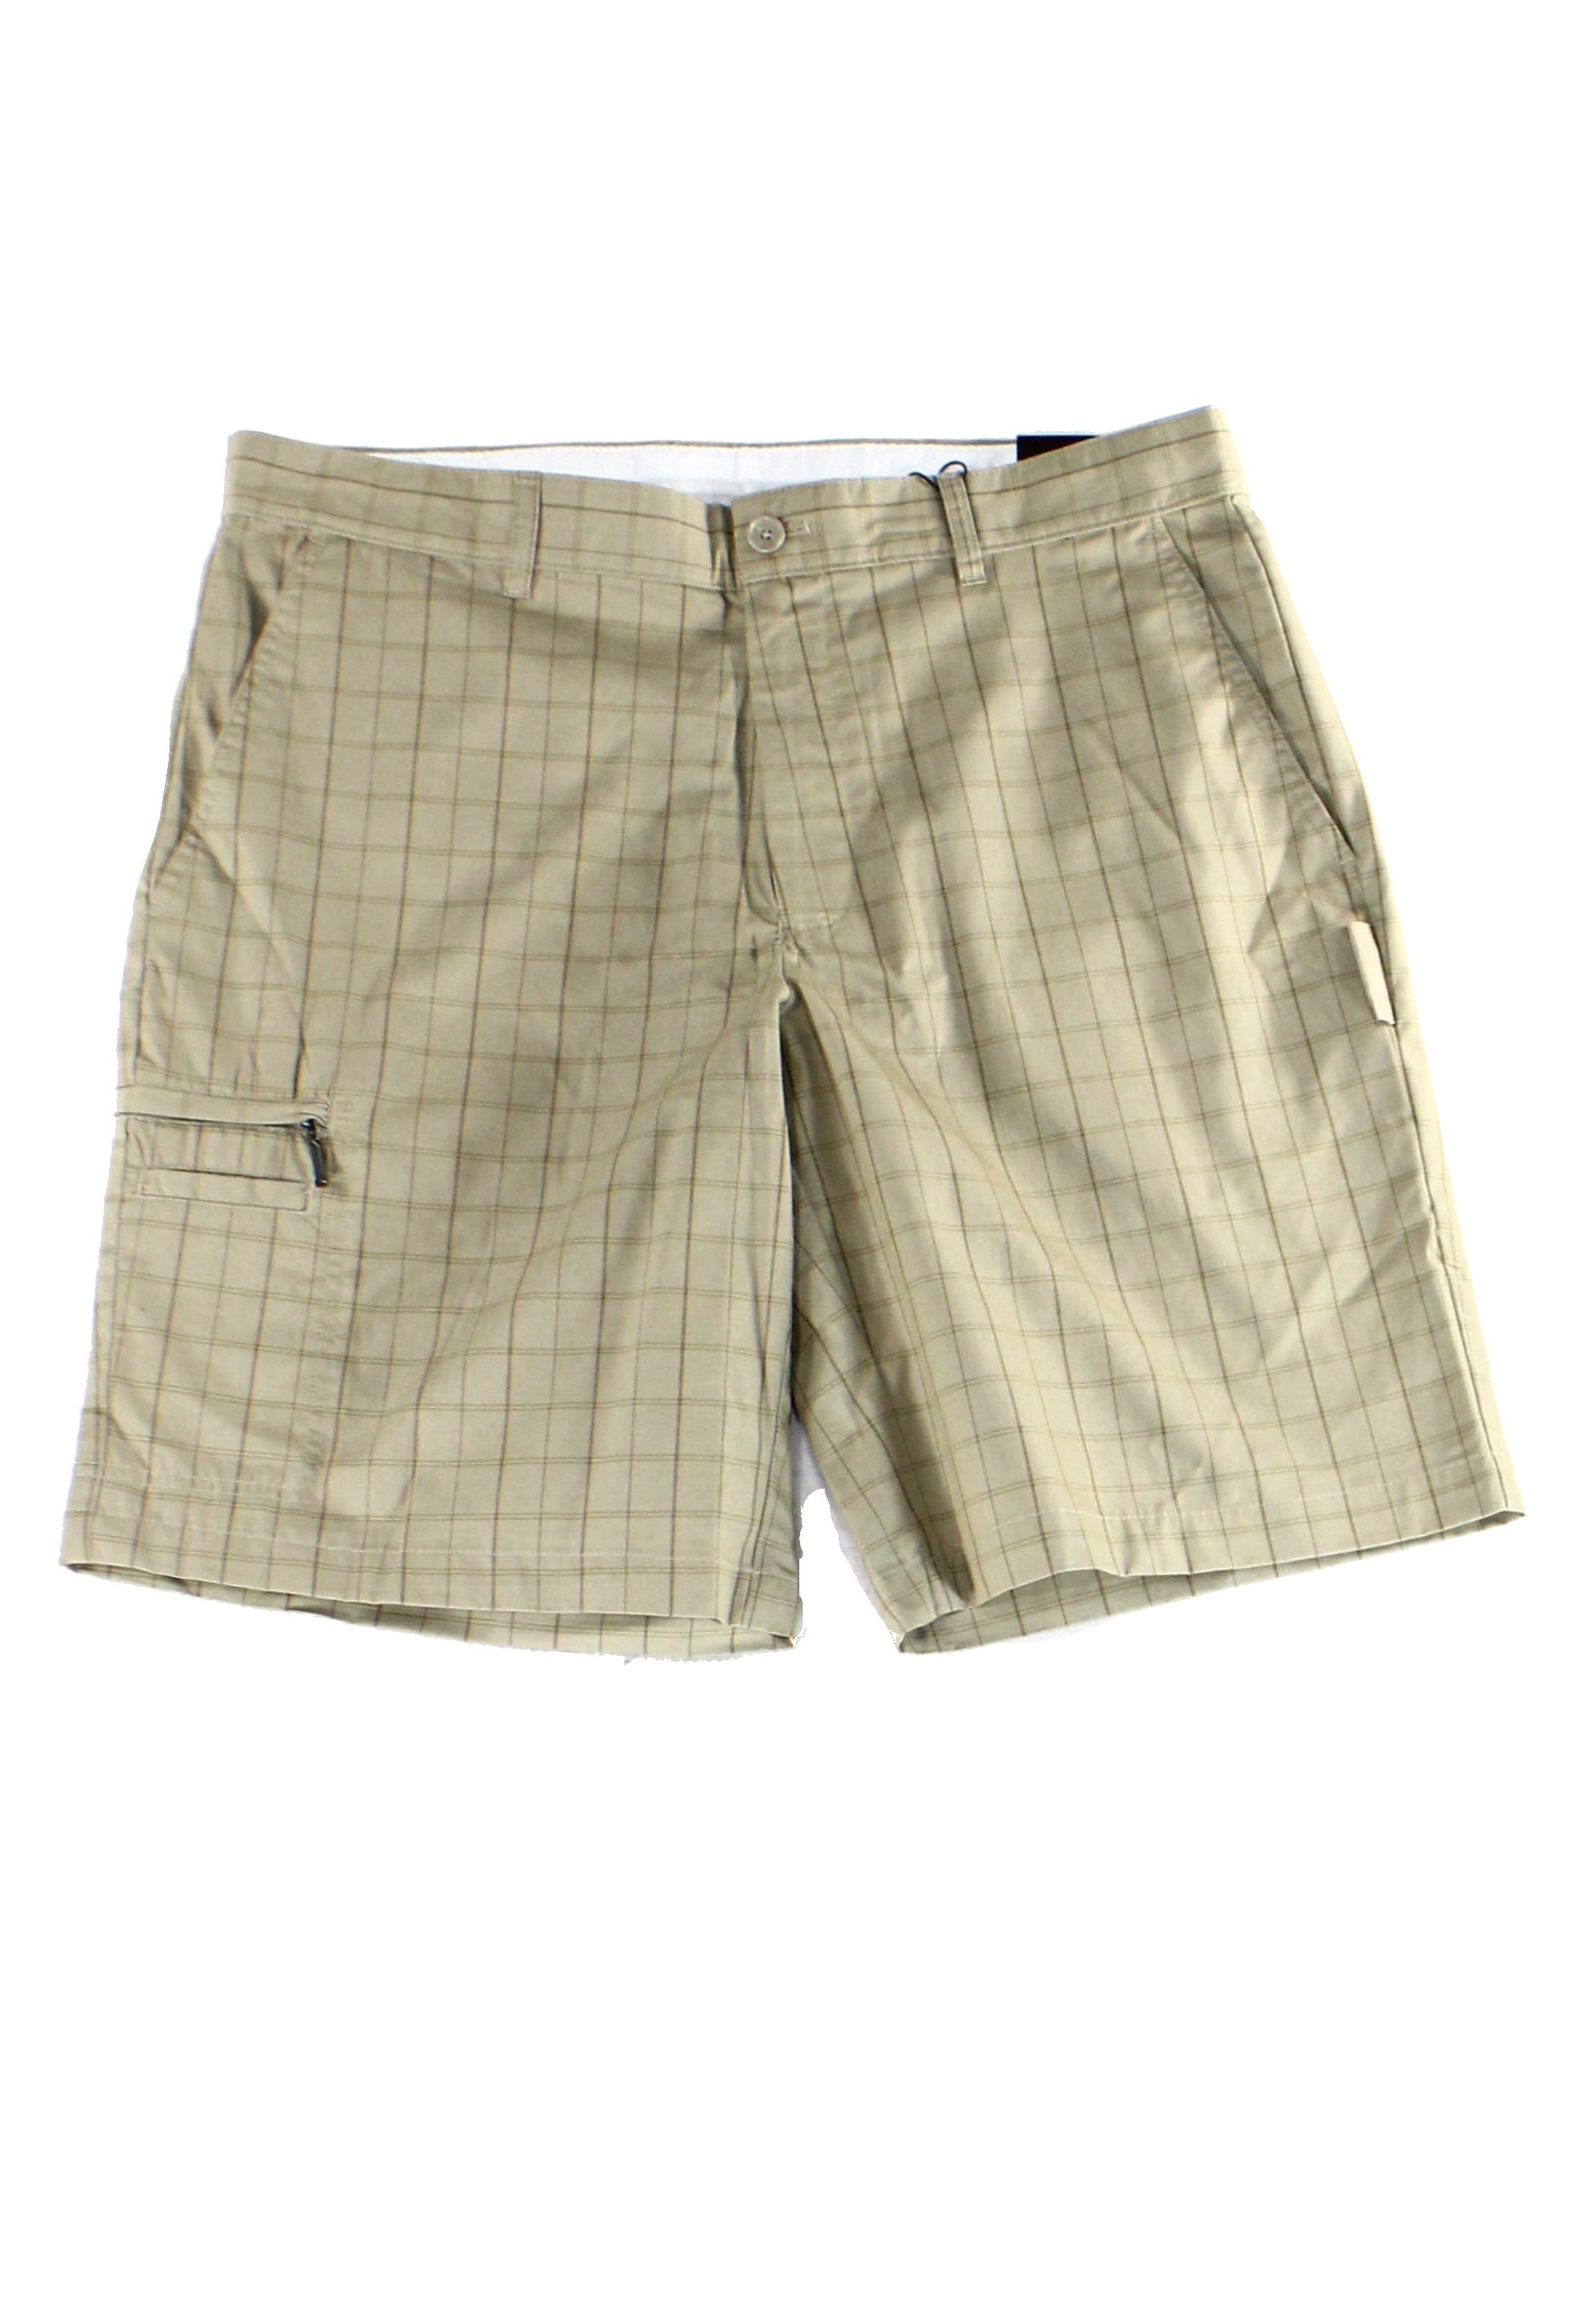 Greg Norman - Greg Norman NEW Brown Mens Size 36 Plaid Button-Front ...